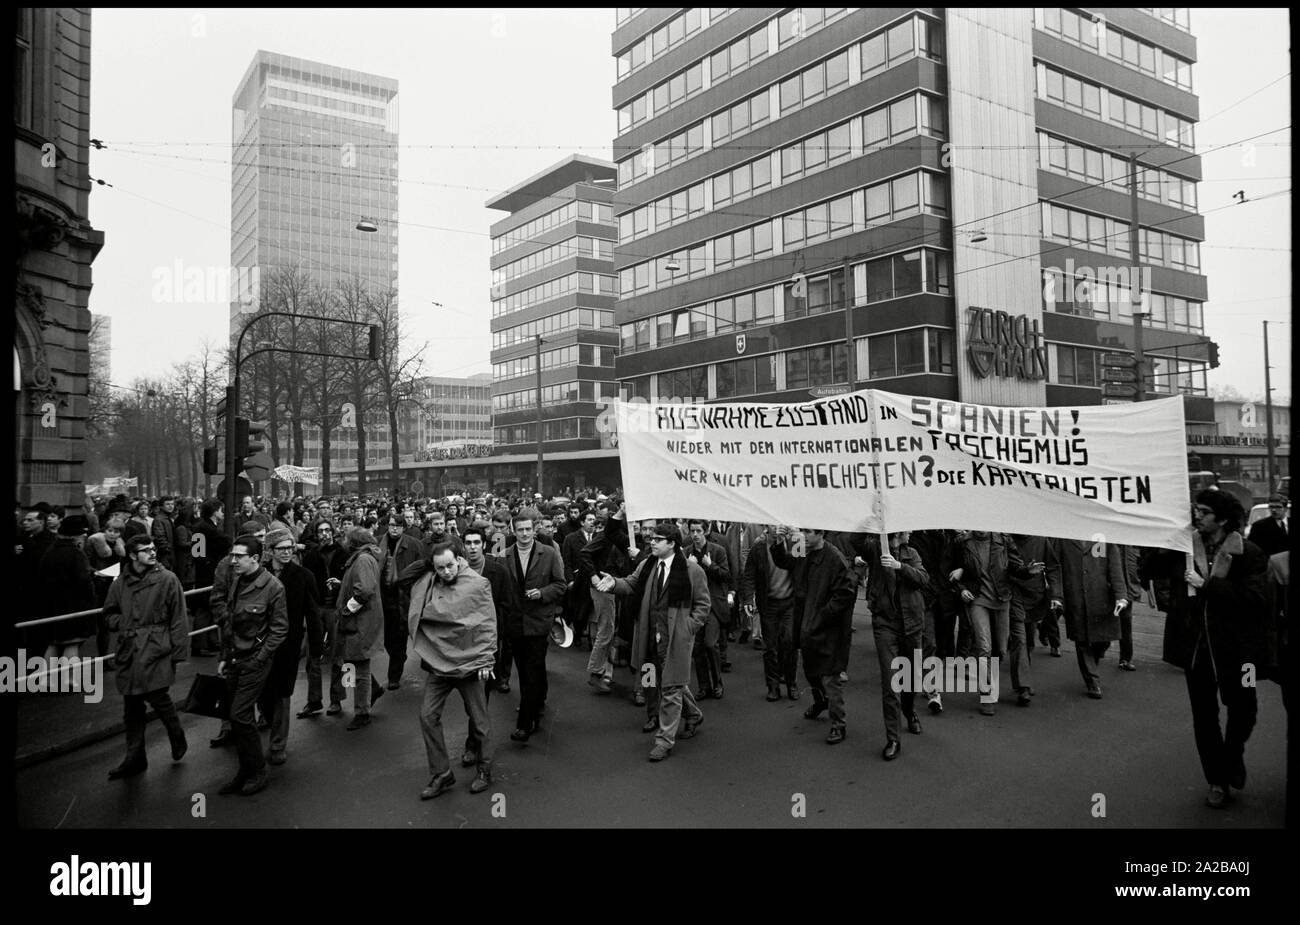 Germany. Frankfurt. 1. February 1969. About 1000 students of the University of Frankfurt rallying against the state of emergency in Spain.  Copyright Notice: Max Scheler/SZ Photo. Stock Photo